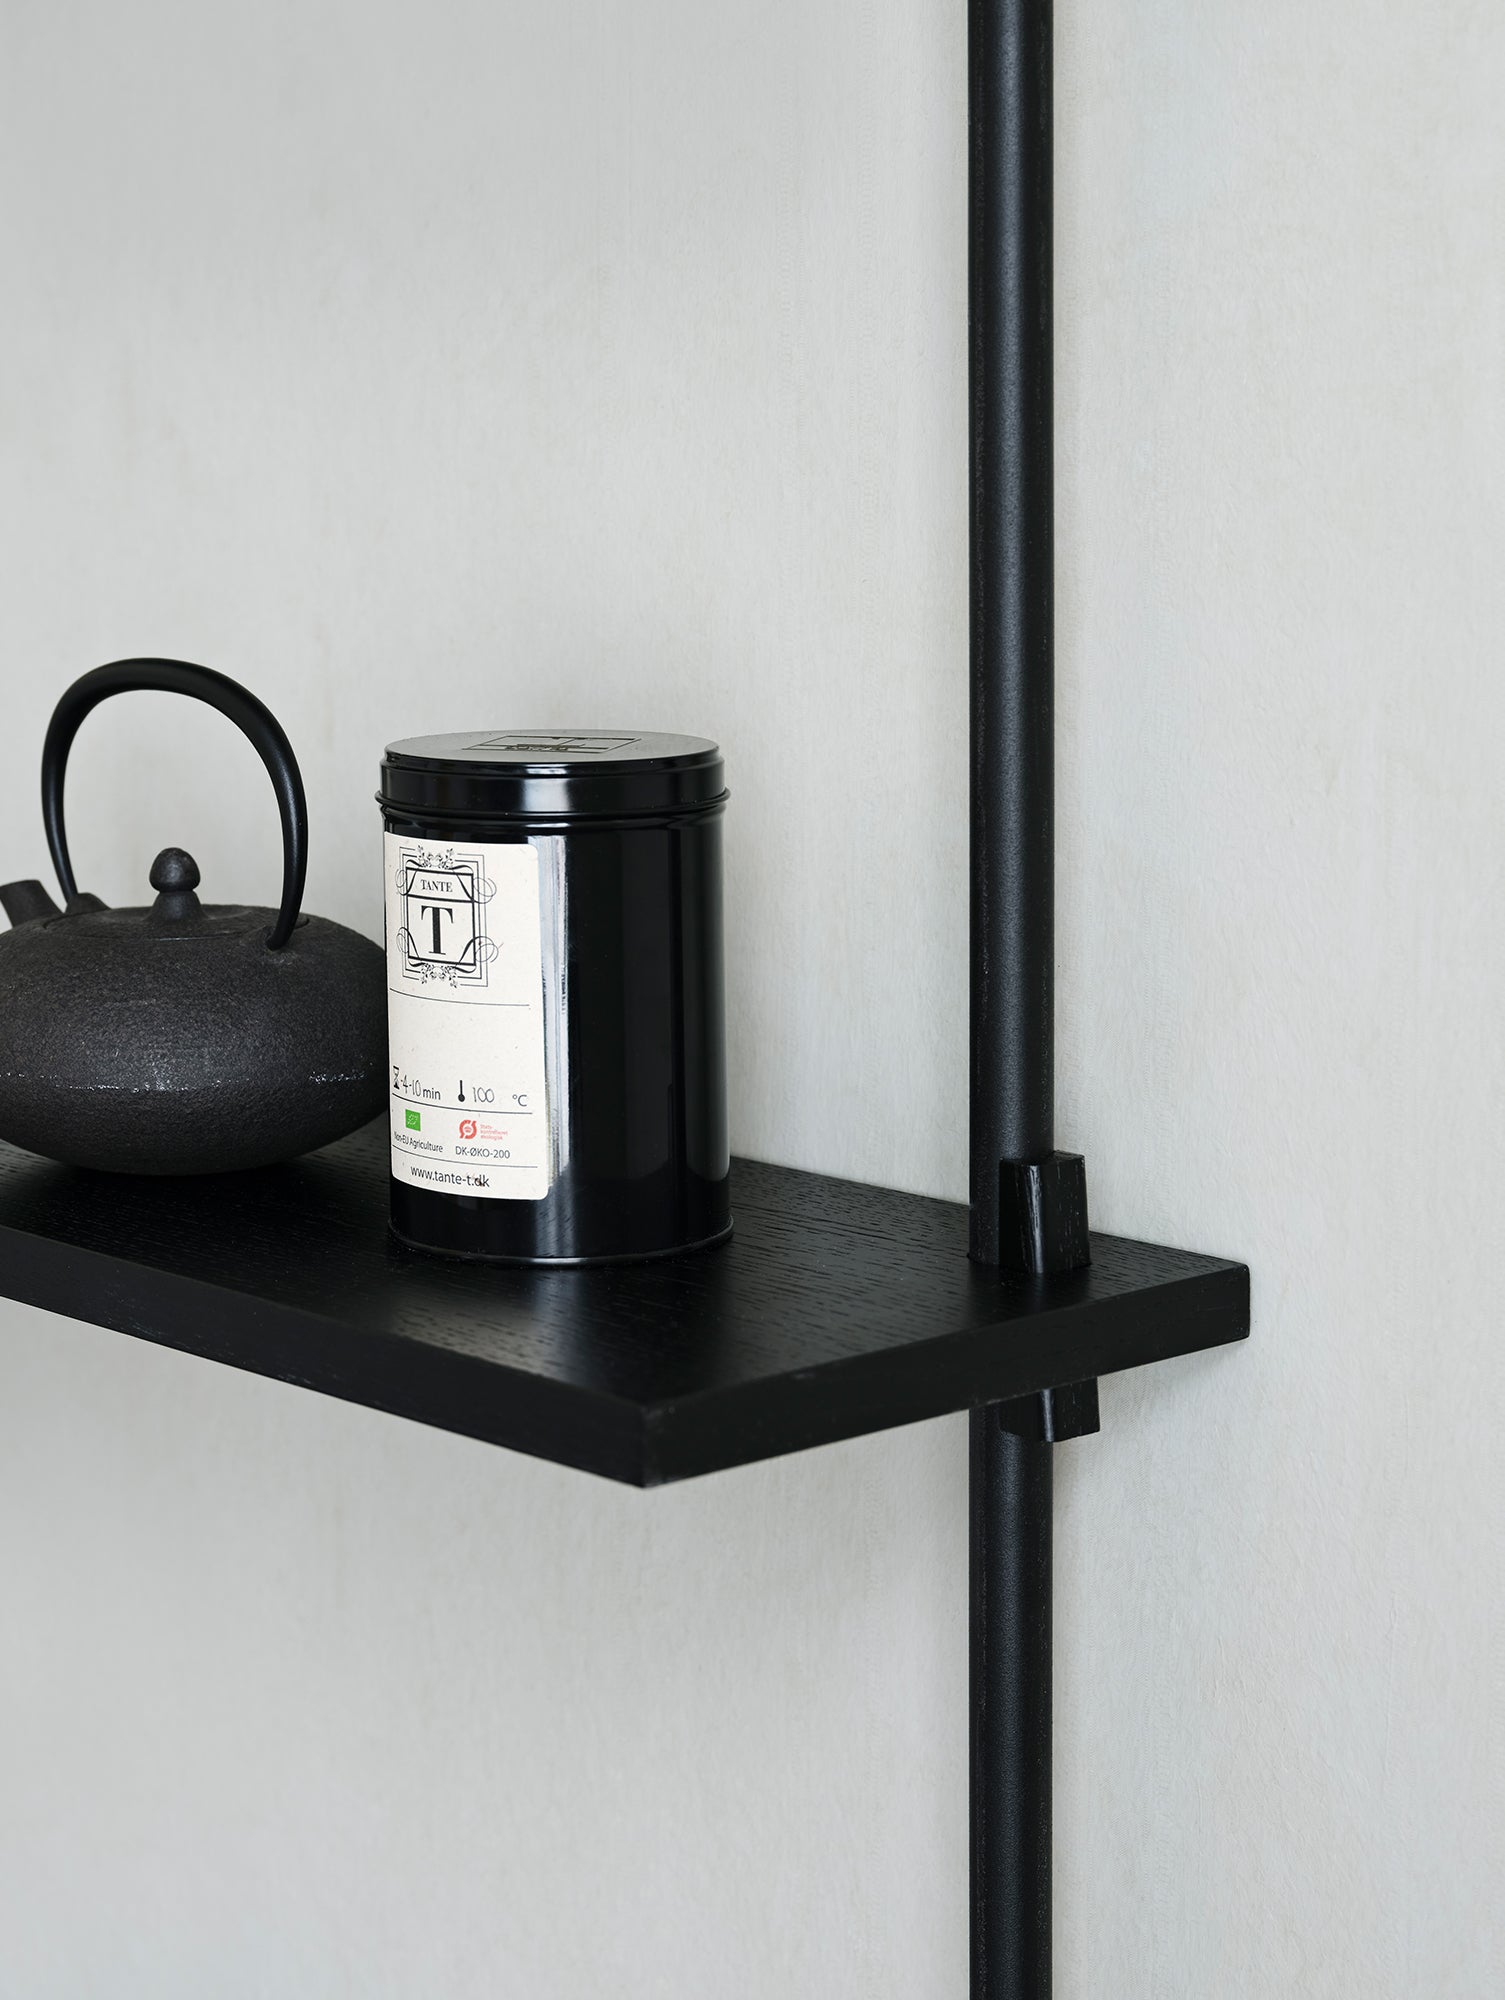 Wall Shelving System Sets (85 cm) by Moebe